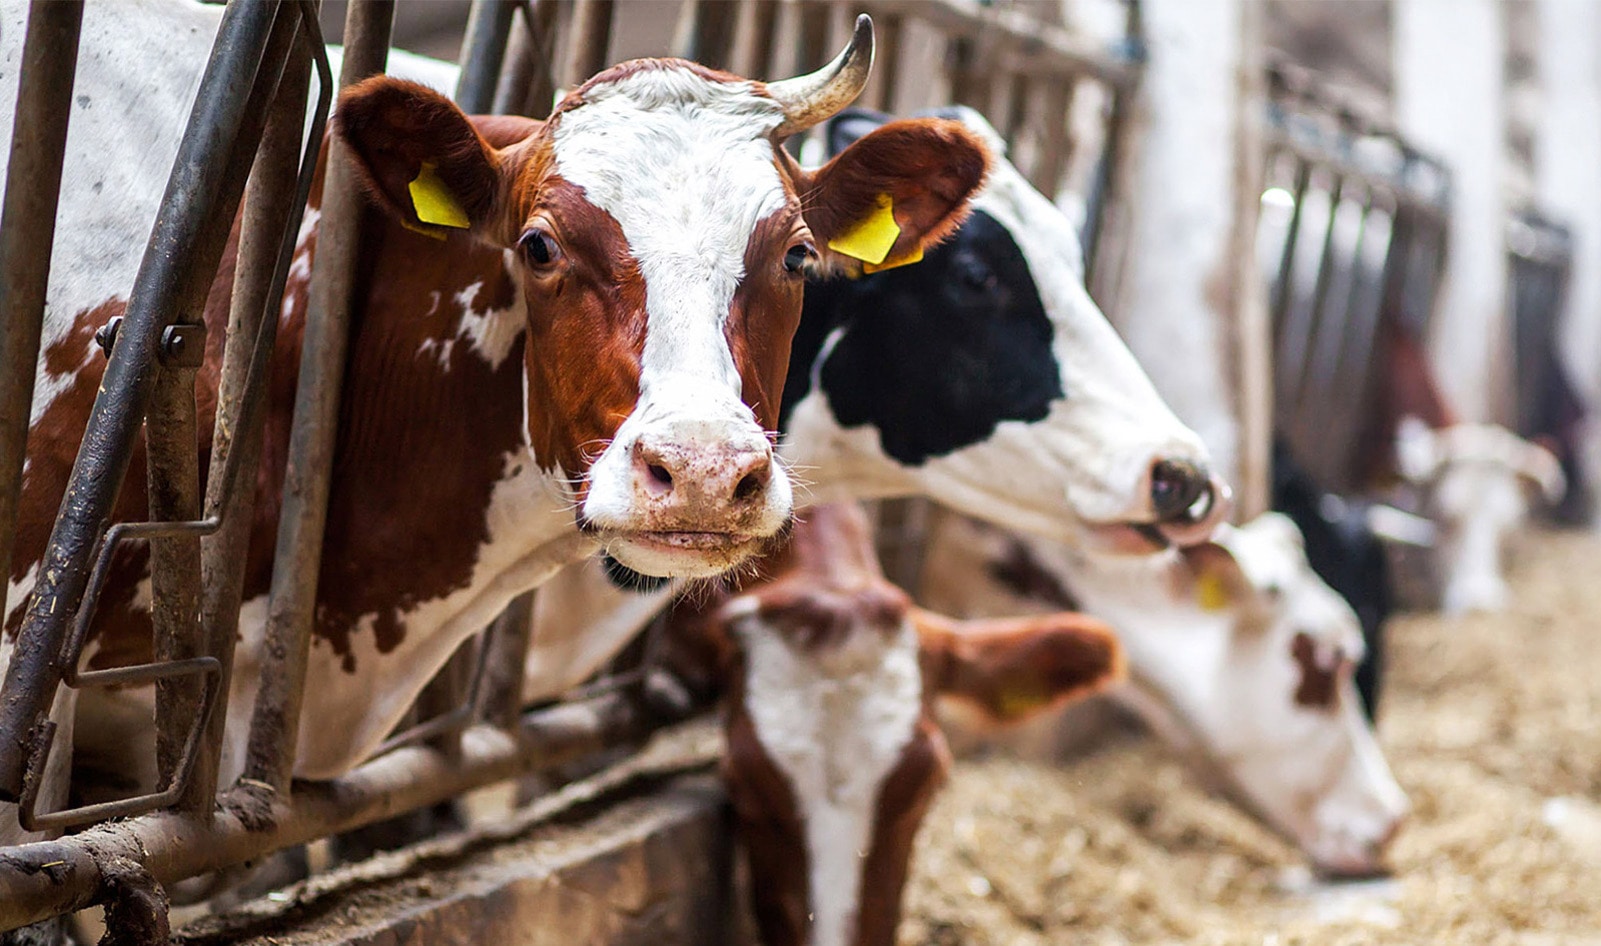 What Is Factory Farming, Exactly? Here's Why It's Time To Change the Food System&nbsp;